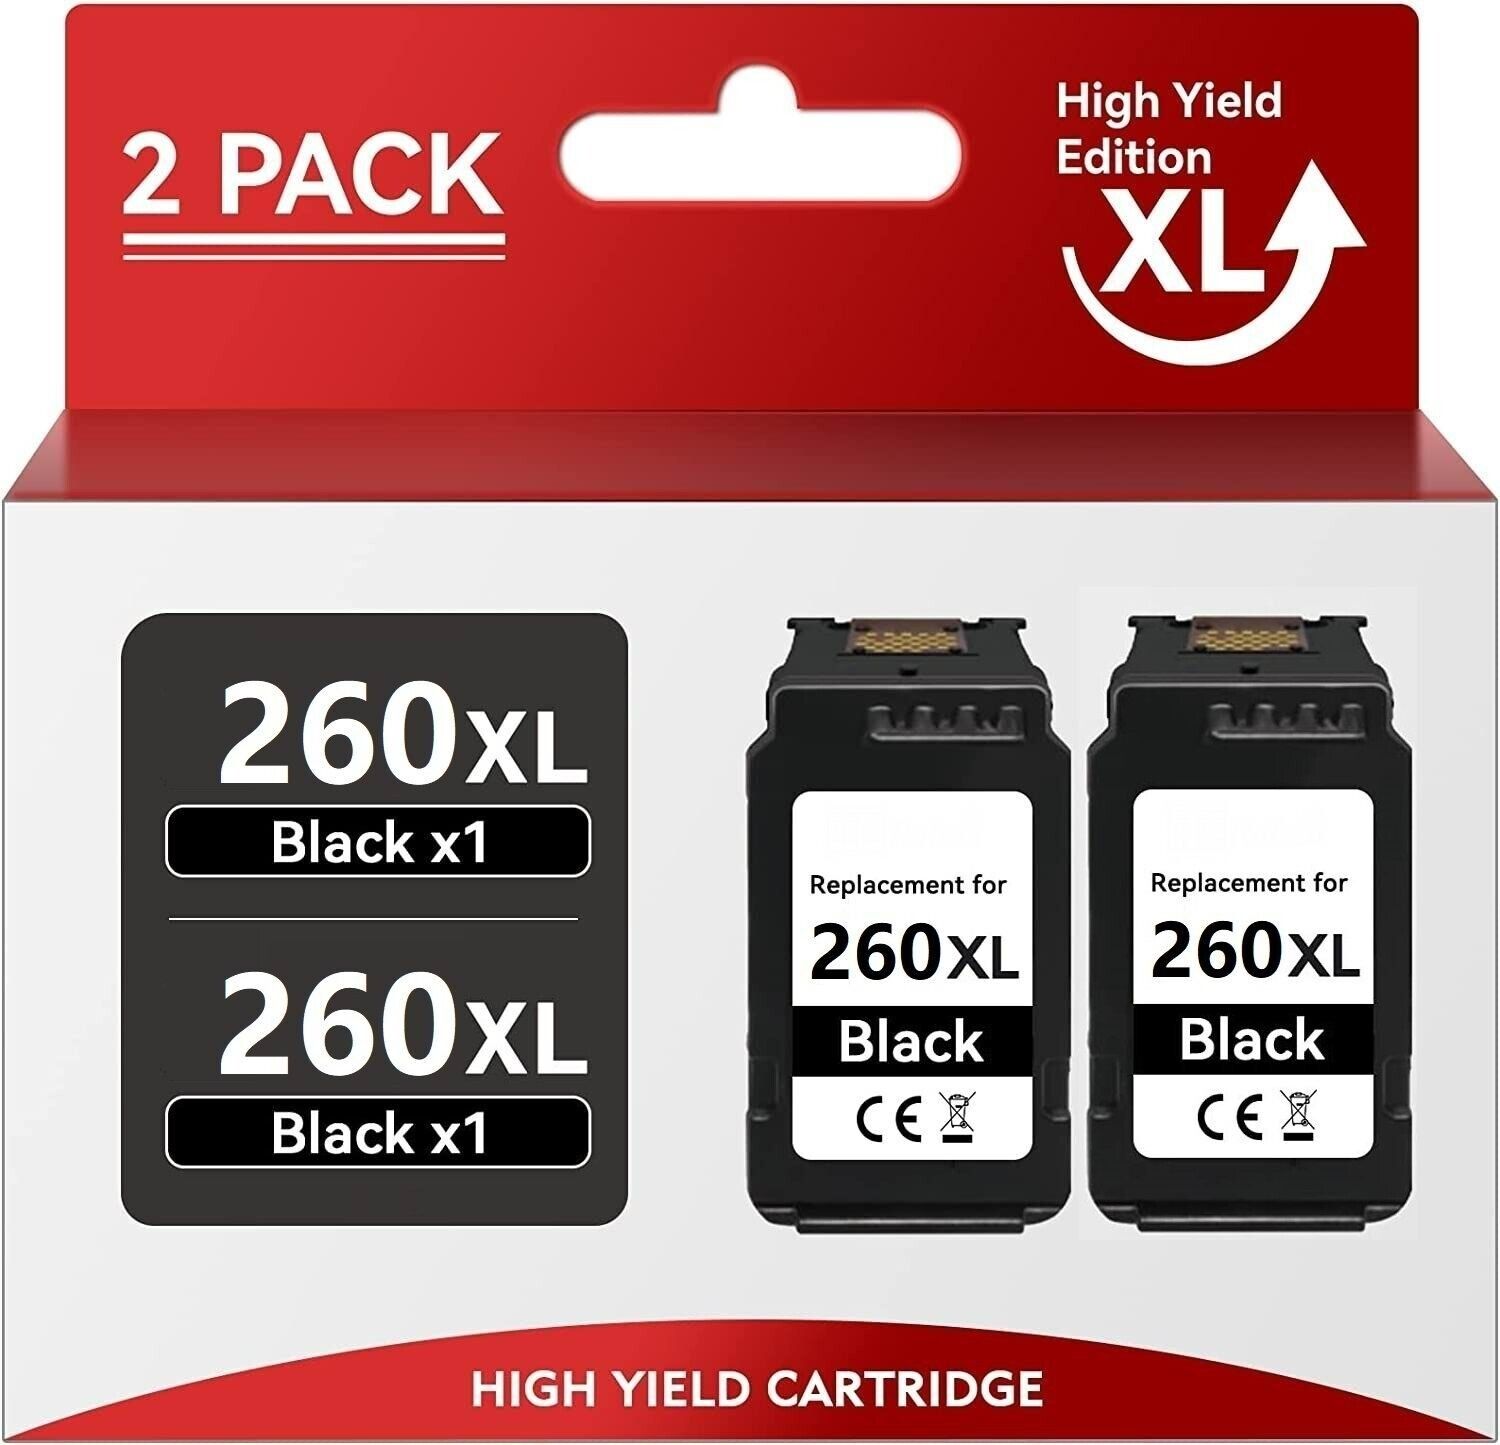 2 Black Replacement for Canon PG-260 XL 3706C001 Black High Yield Ink Cartridge